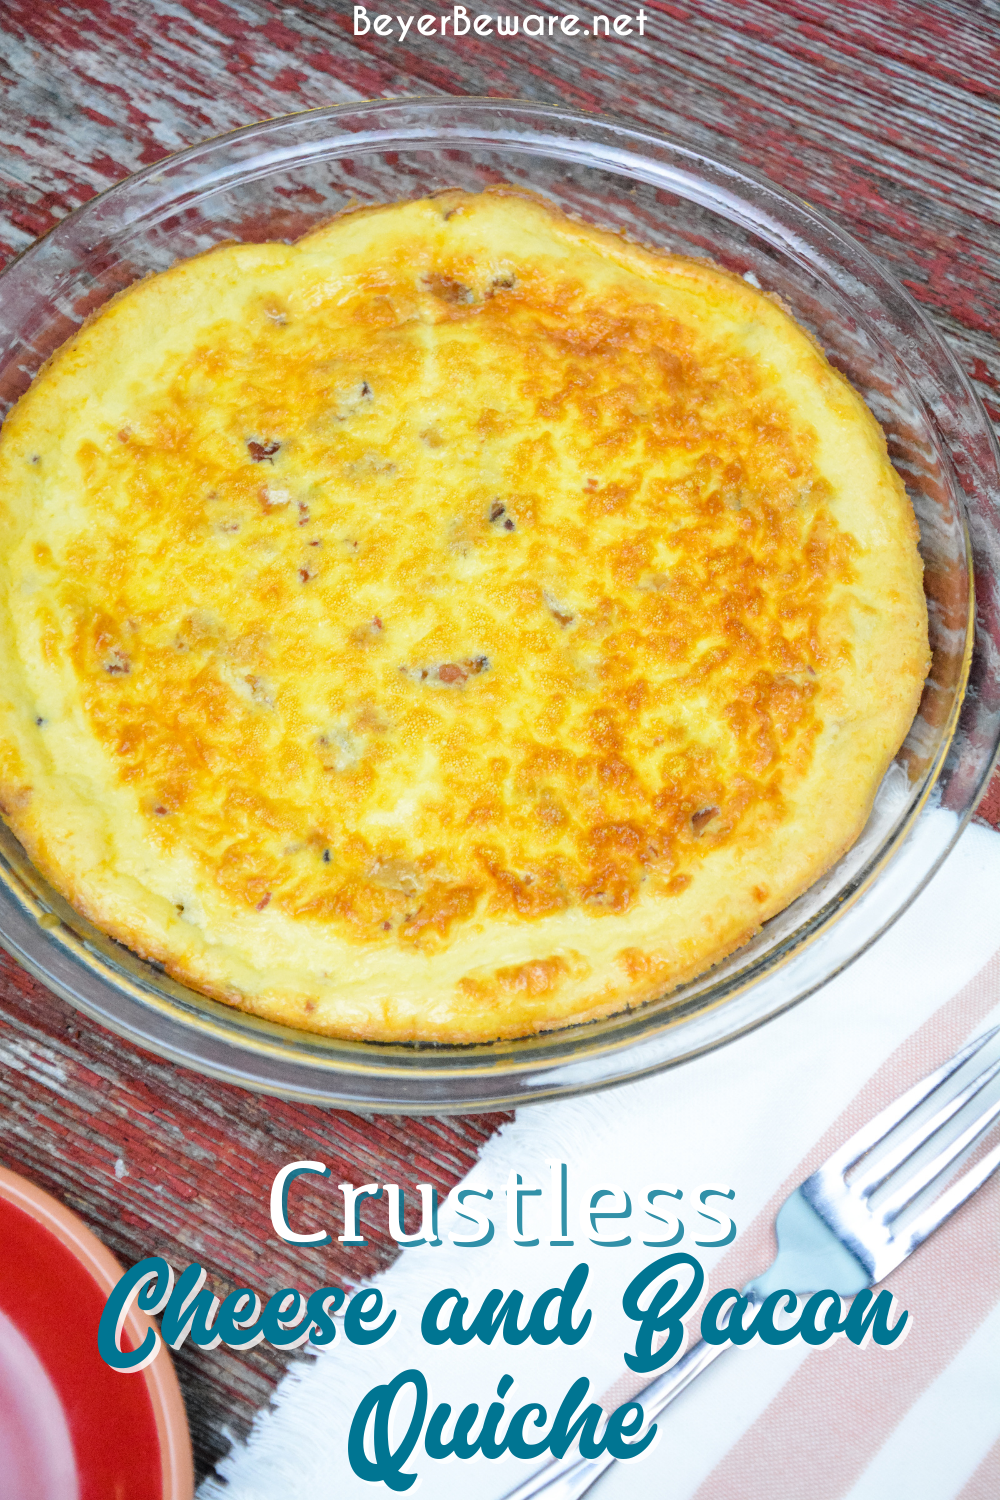 Crustless cheese and bacon quiche is a velvety smooth quiche recipe made quickly in the blender with eggs, cottage cheese, cream and then combined with bacon in a pie pan.